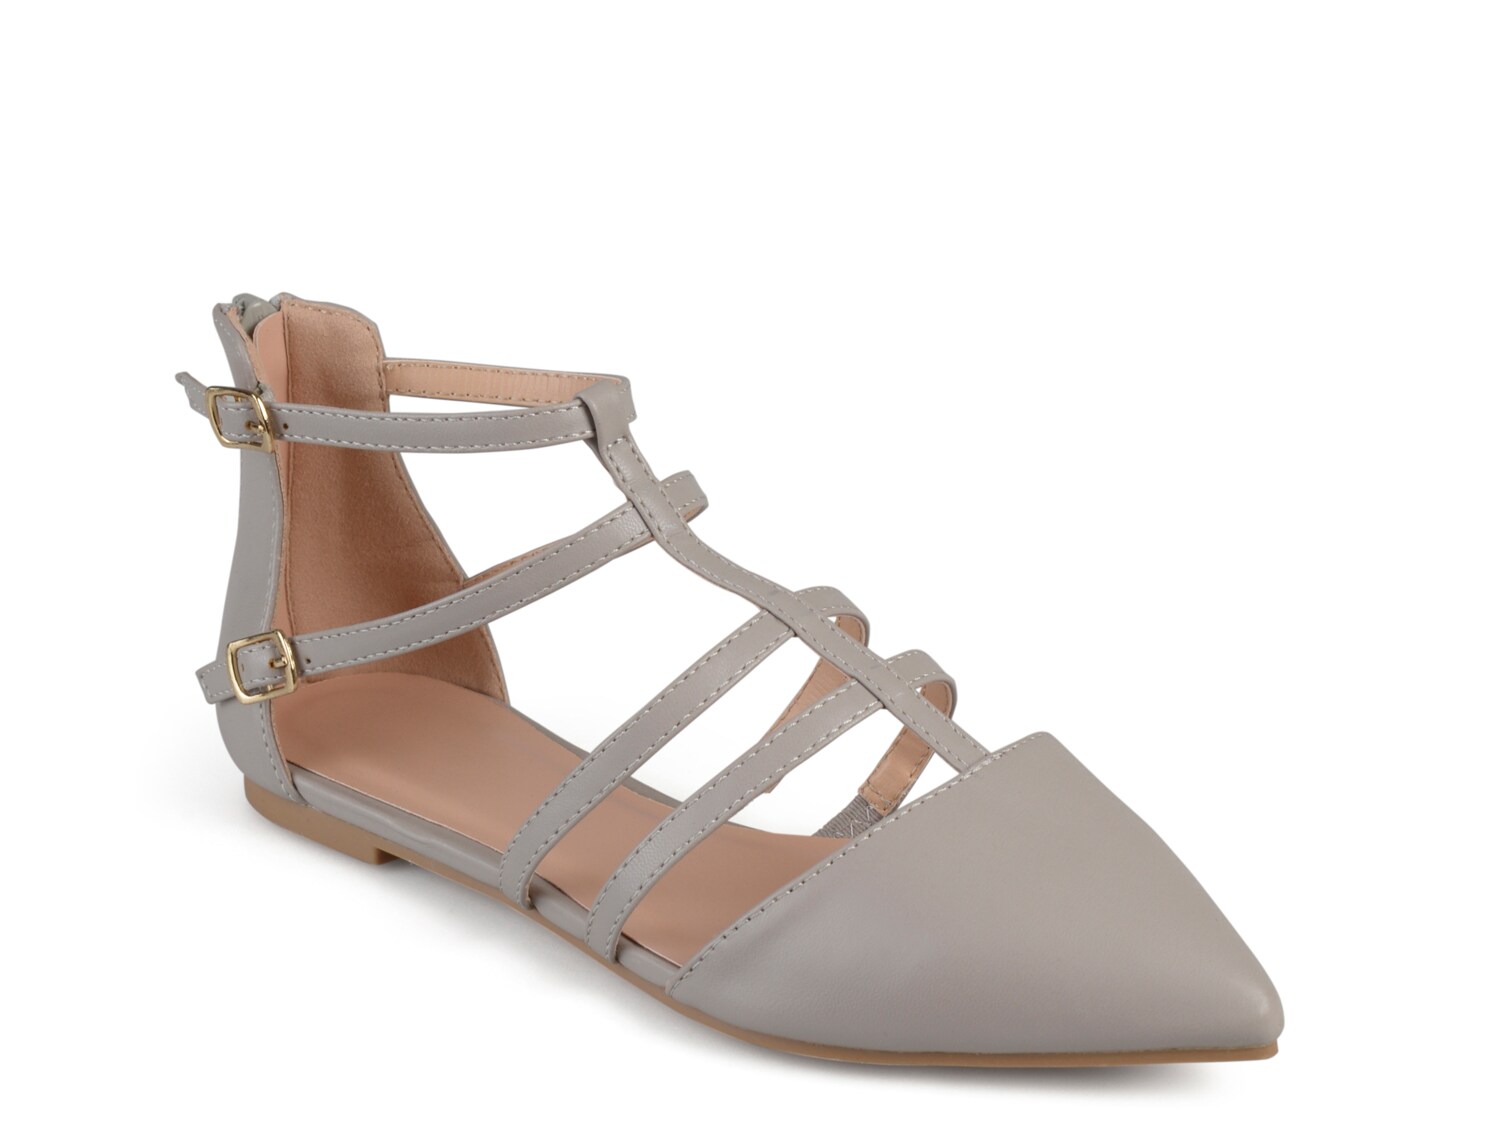 Journee Collection Dorsy Flat - Free Shipping | DSW